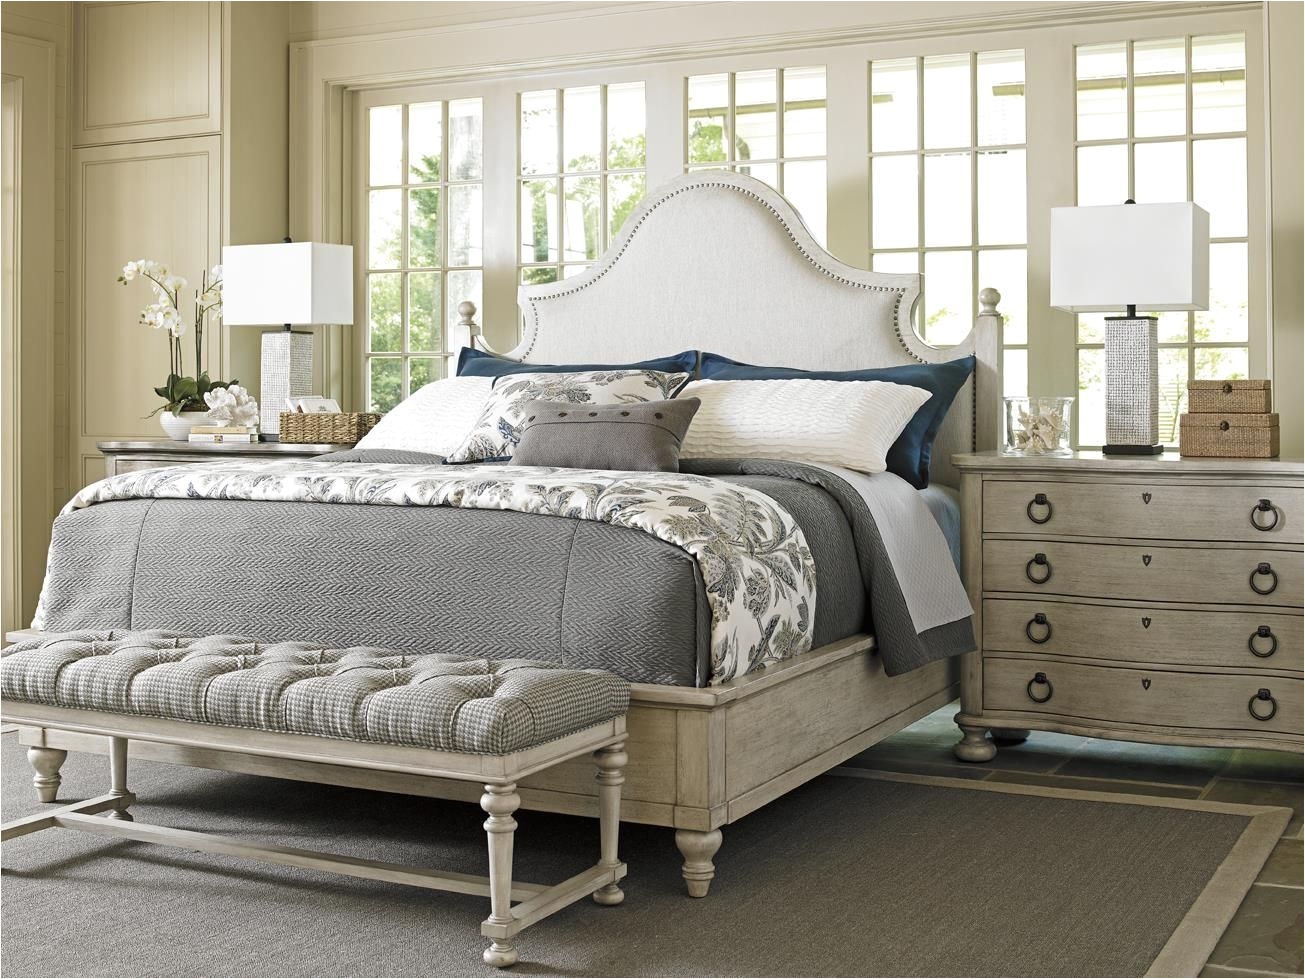 lexington oyster bay queen bedroom group baers furniture bedroom group boca raton naples sarasota ft myers miami ft lauderdale palm beach